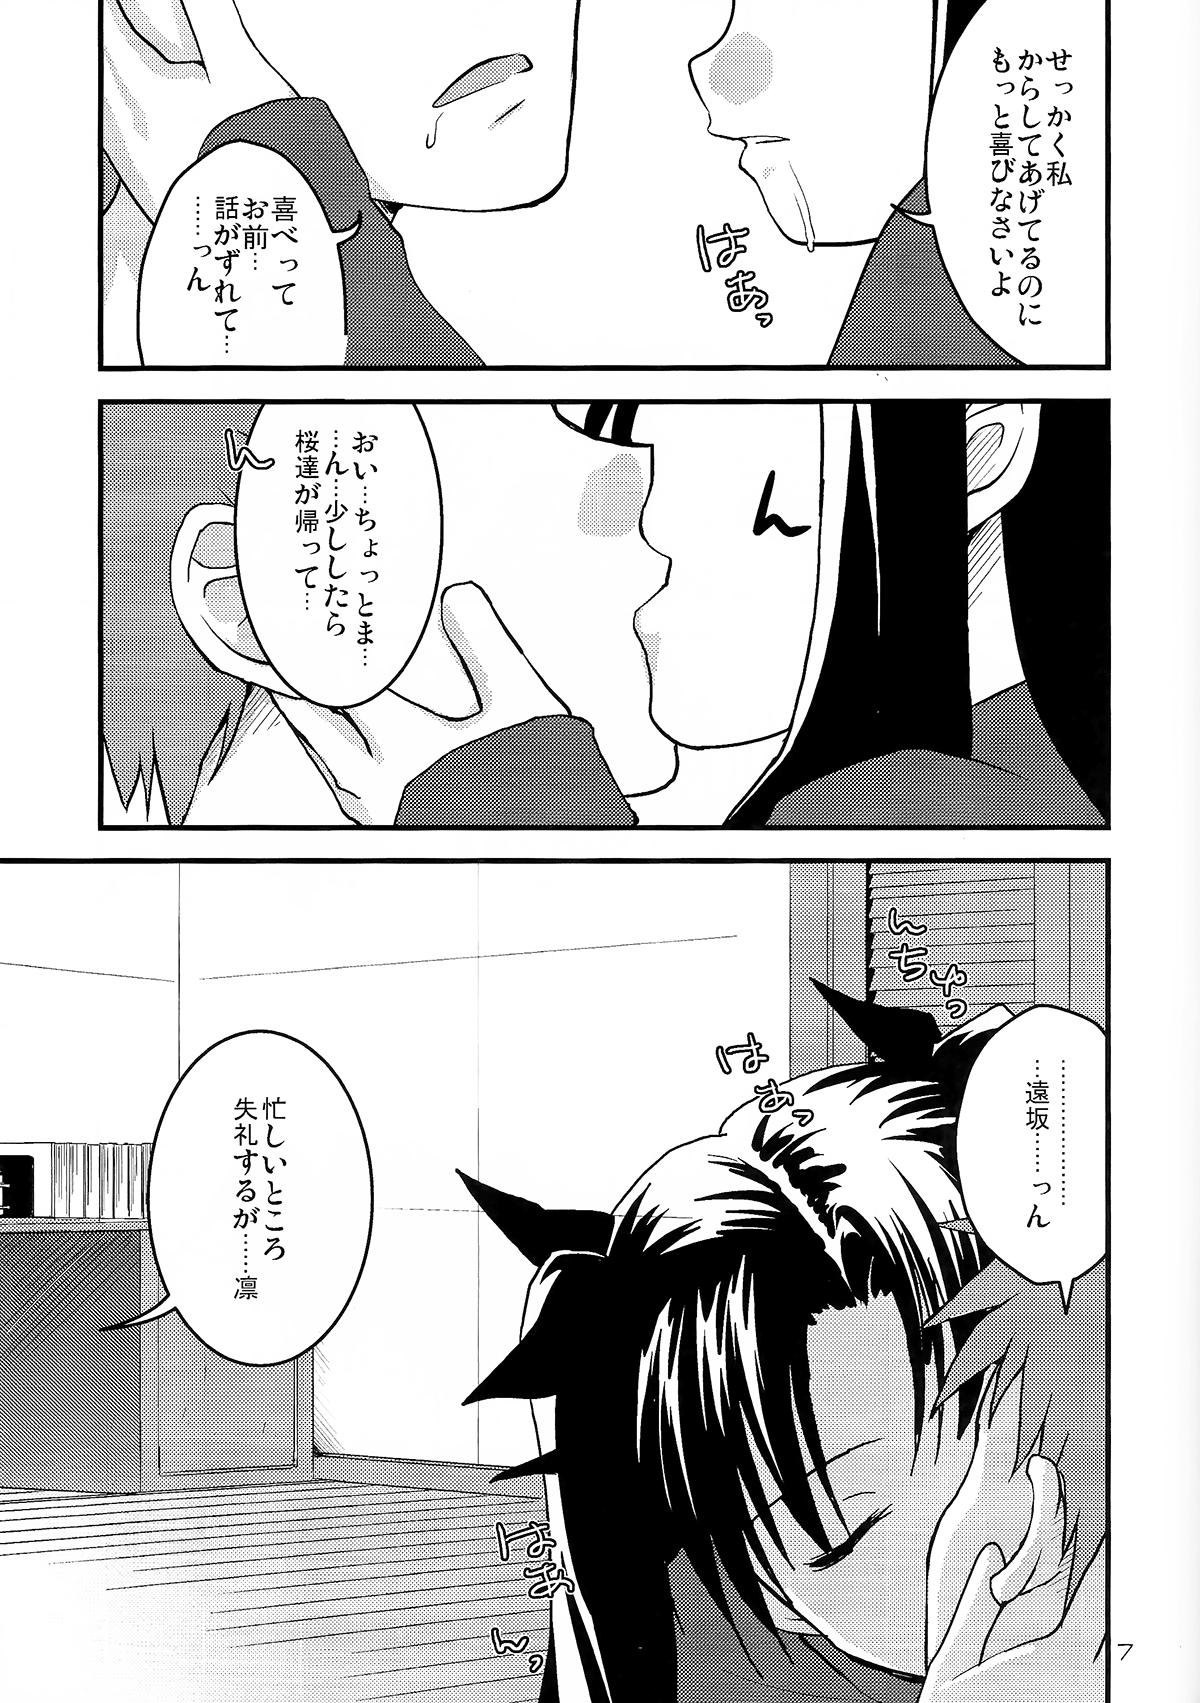 Spreadeagle Fakers - Fate stay night Couple Fucking - Page 6